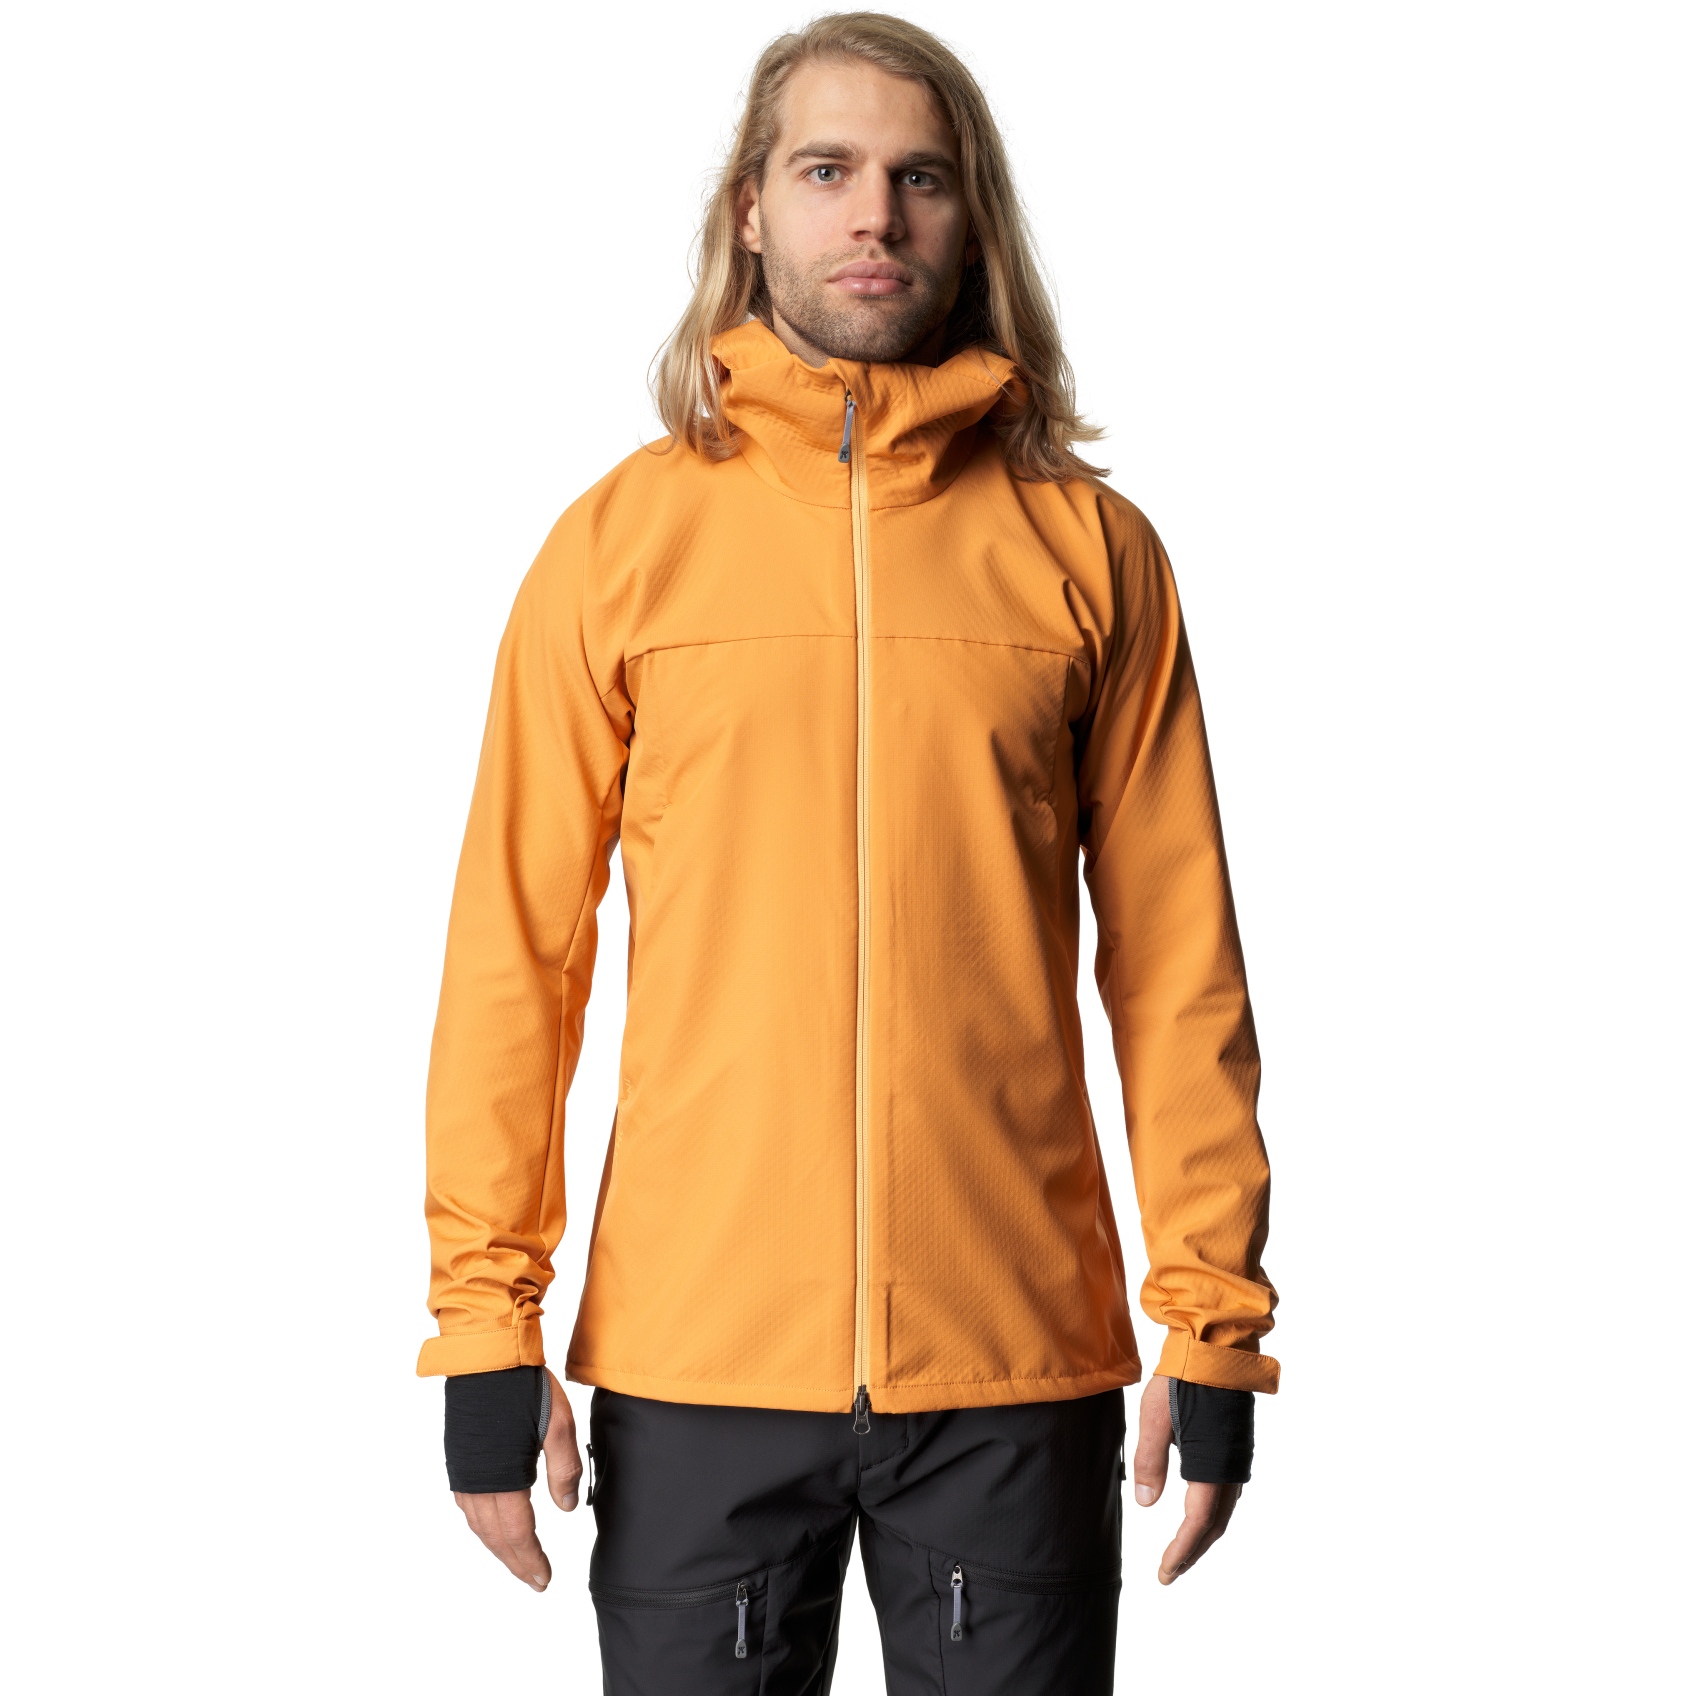 Picture of Houdini Pace Jacket Men - Sun Ray